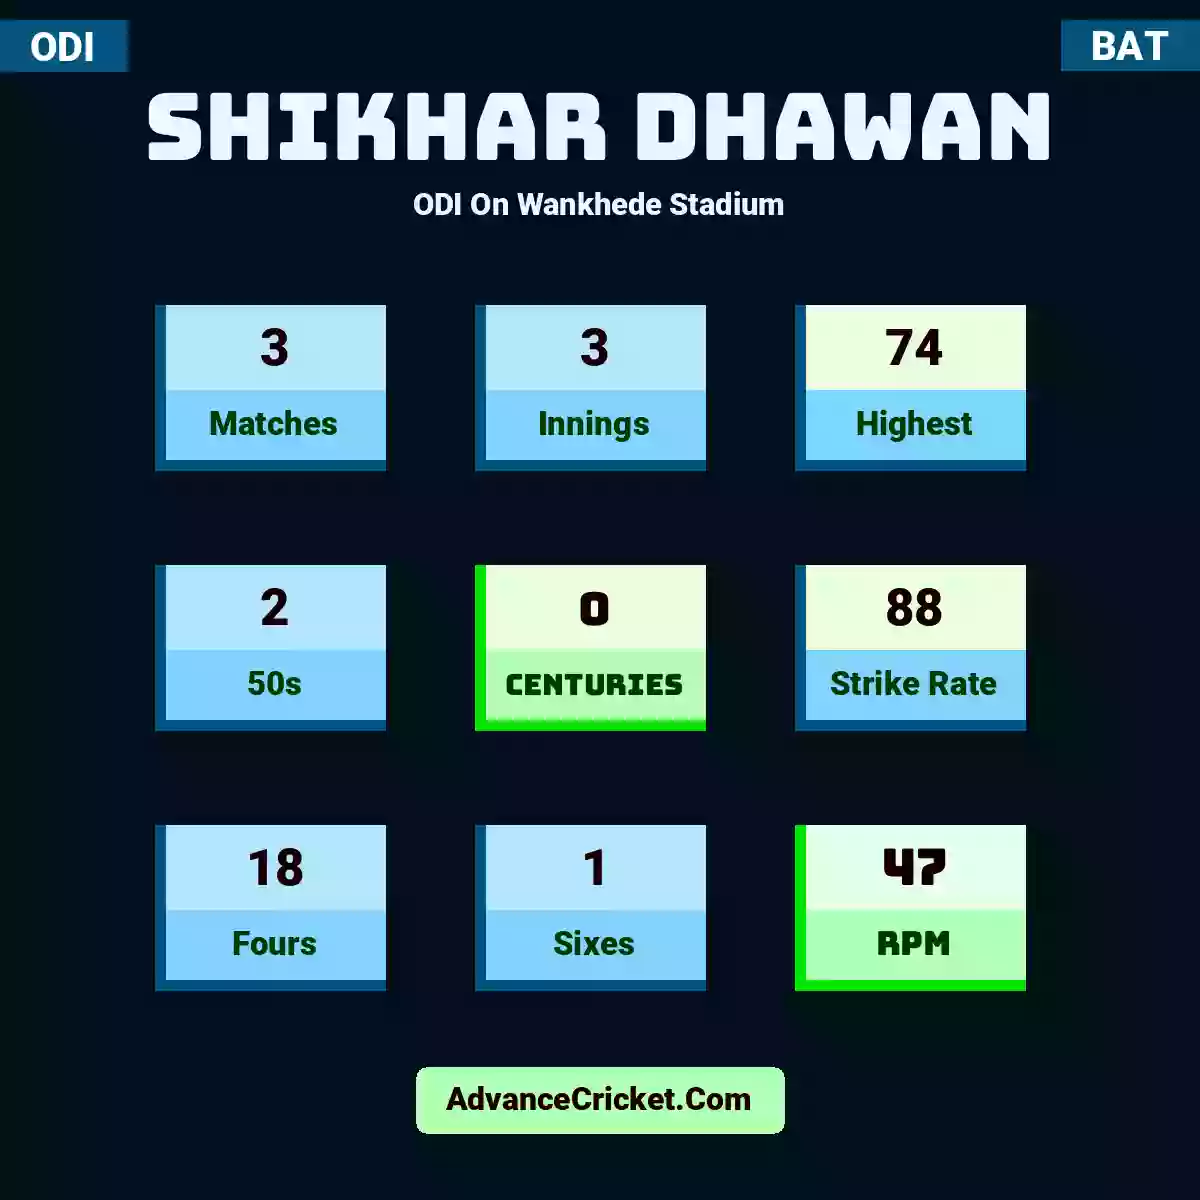 Shikhar Dhawan ODI  On Wankhede Stadium, Shikhar Dhawan played 3 matches, scored 74 runs as highest, 2 half-centuries, and 0 centuries, with a strike rate of 88. S.Dhawan hit 18 fours and 1 sixes, with an RPM of 47.